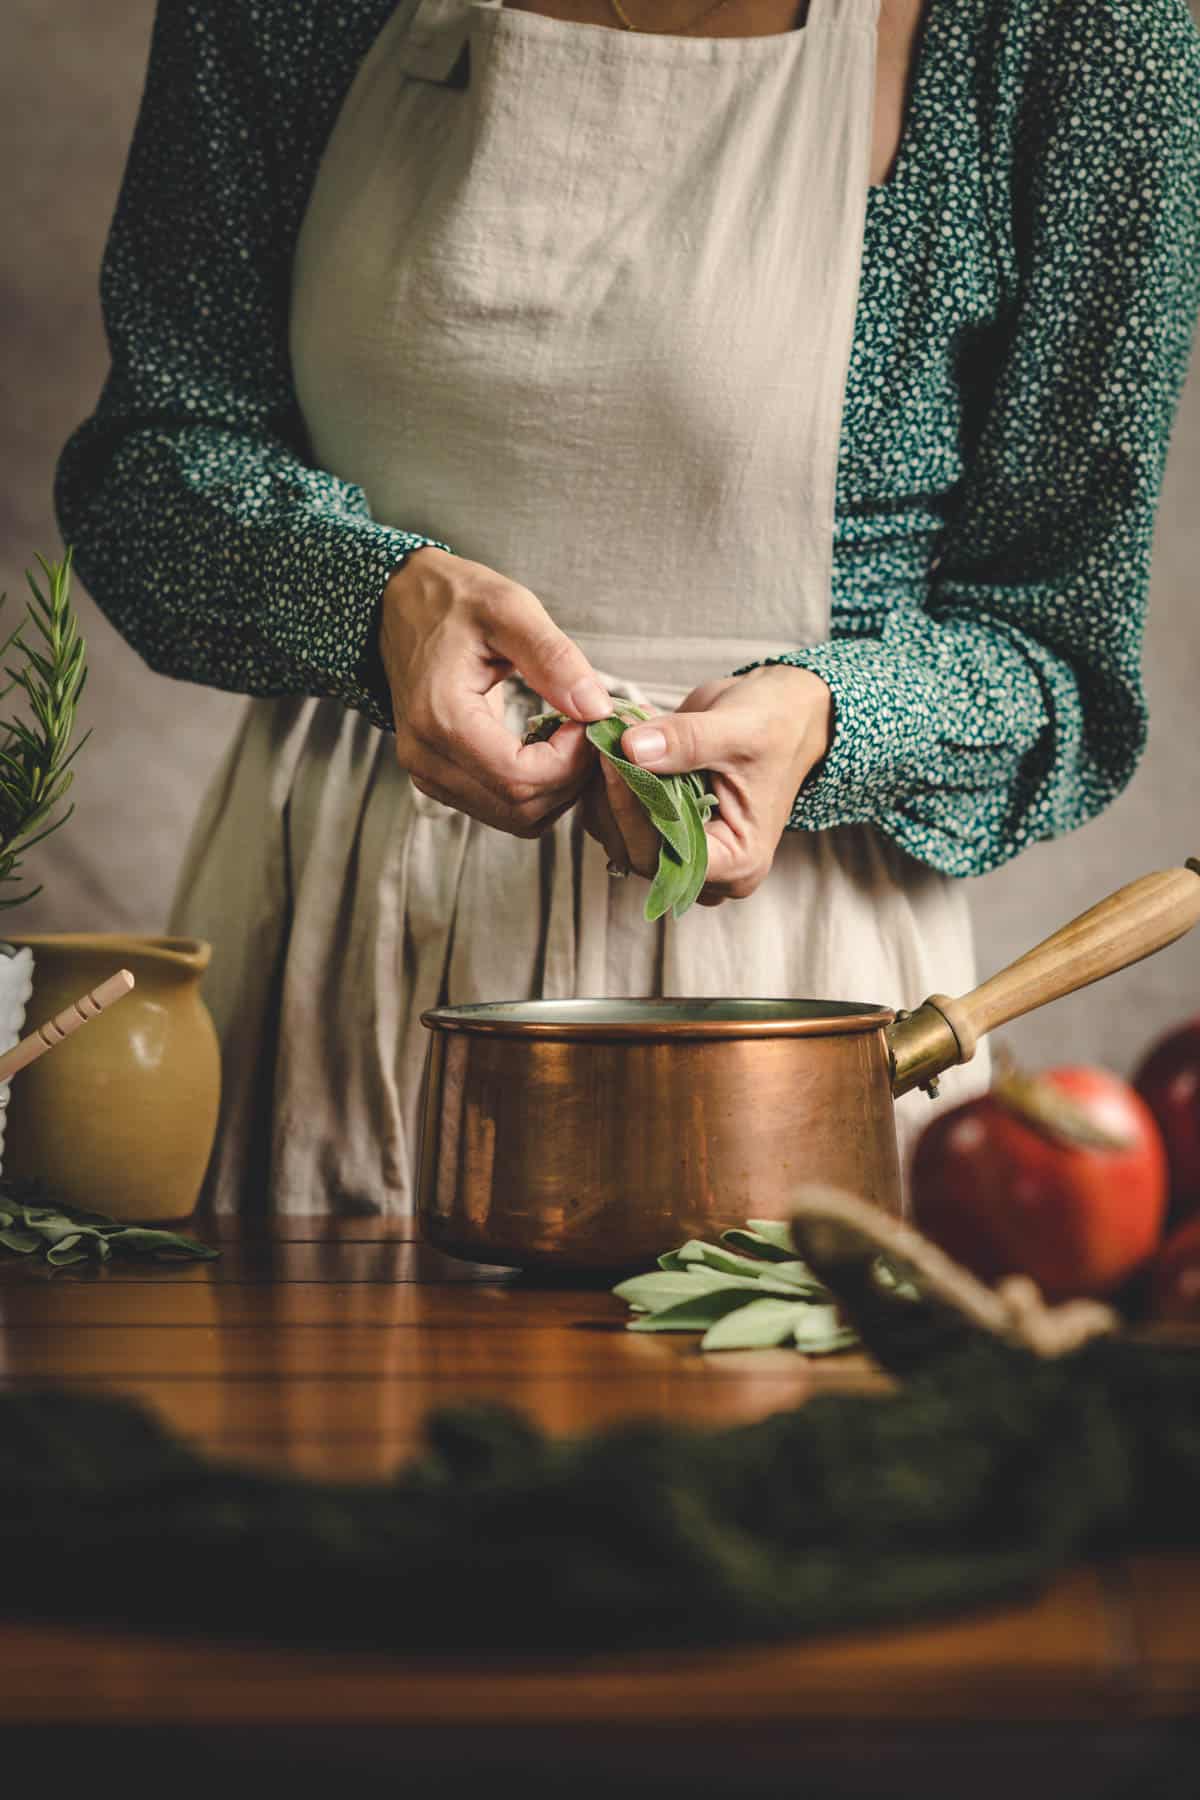 Woman in a green floral shirt and beige apron, pulling sage leaves into a brass saucepan.